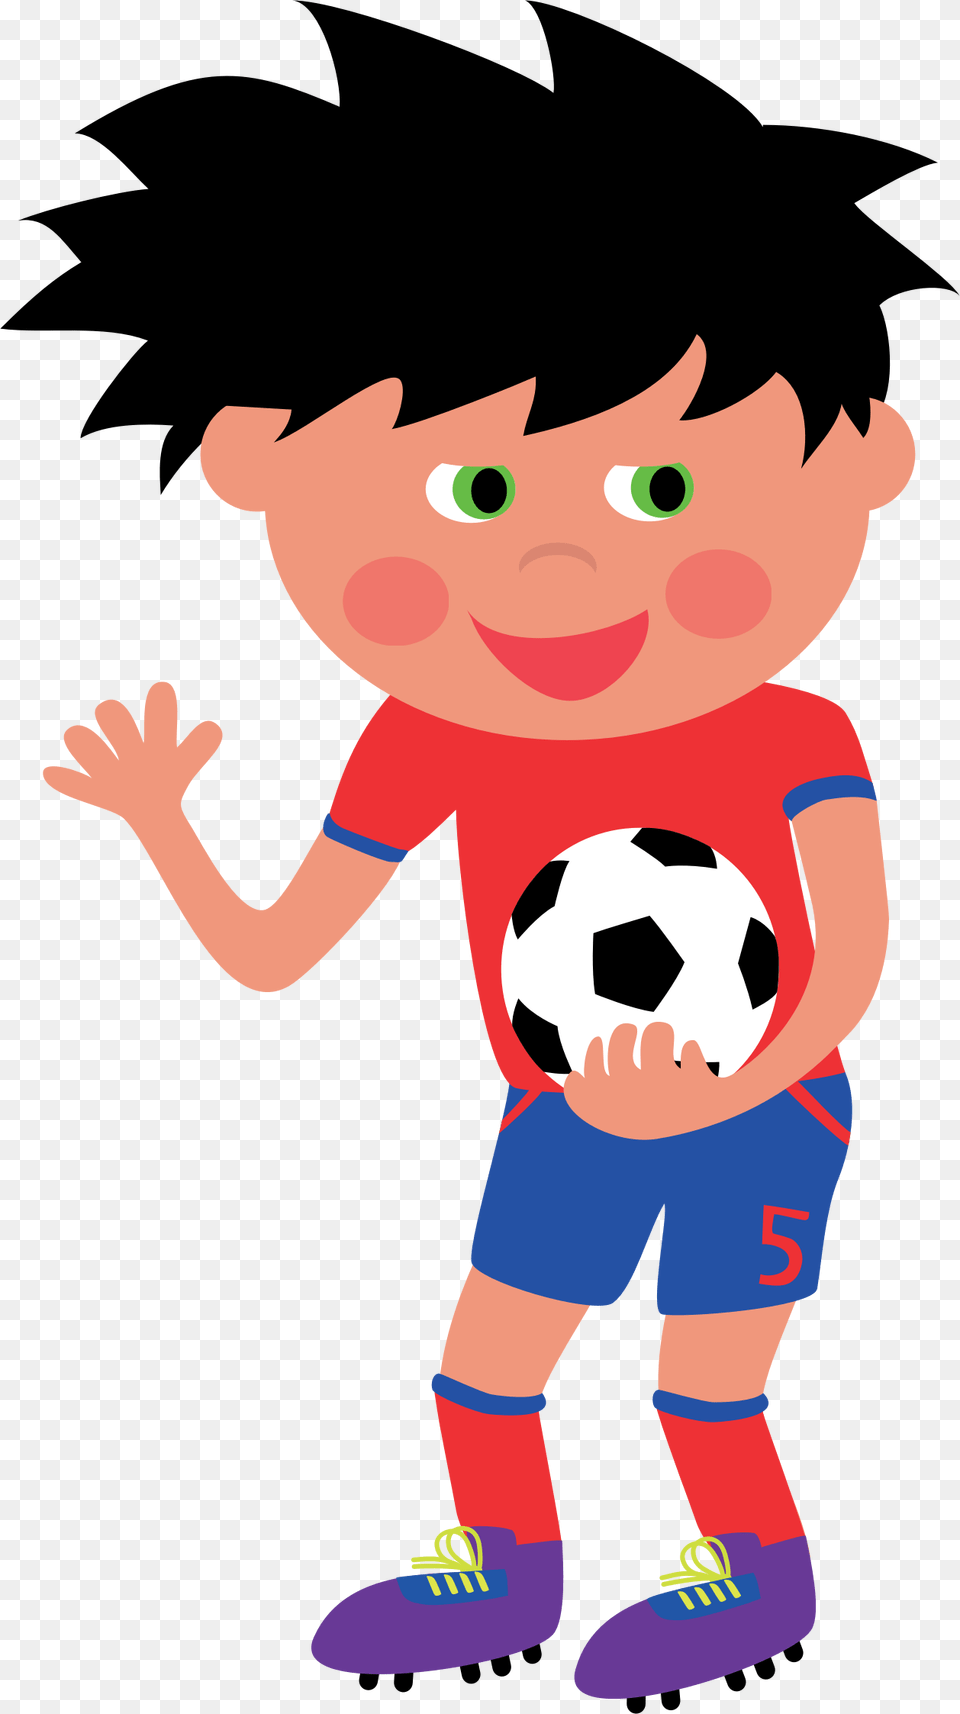 Animated Pictures Of Common Nouns, Baby, Ball, Football, Person Png Image